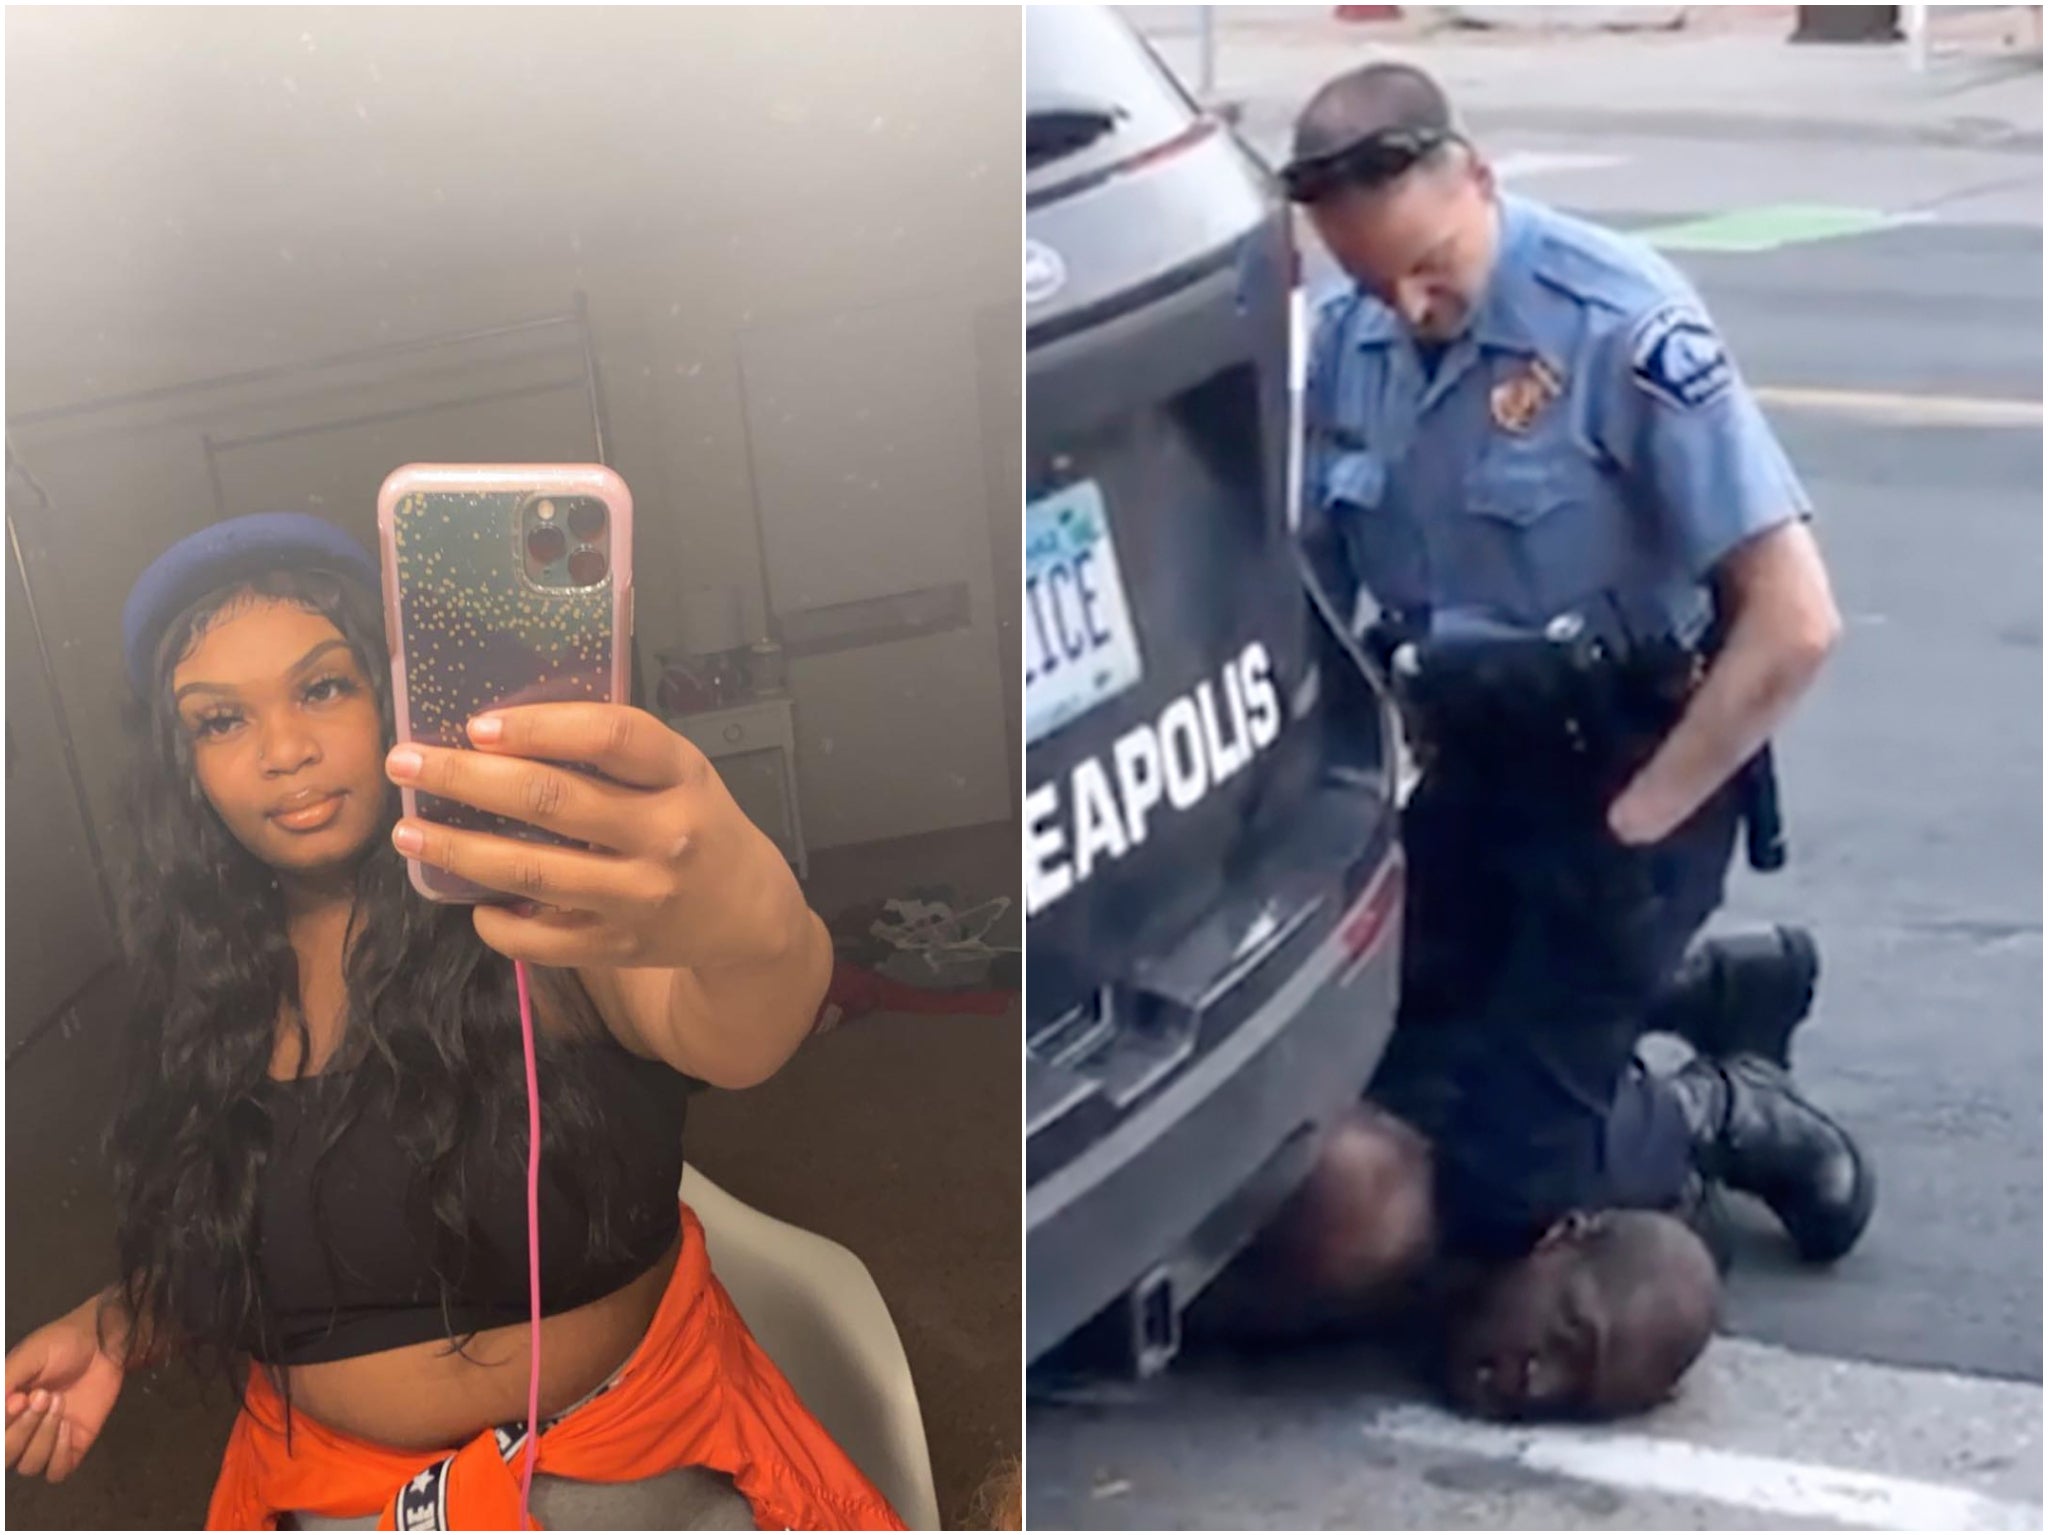 Darnella Frazier captured a video of police killing George Floyd when she was just 17 years old, which quickly brought the death to the attention of the world.